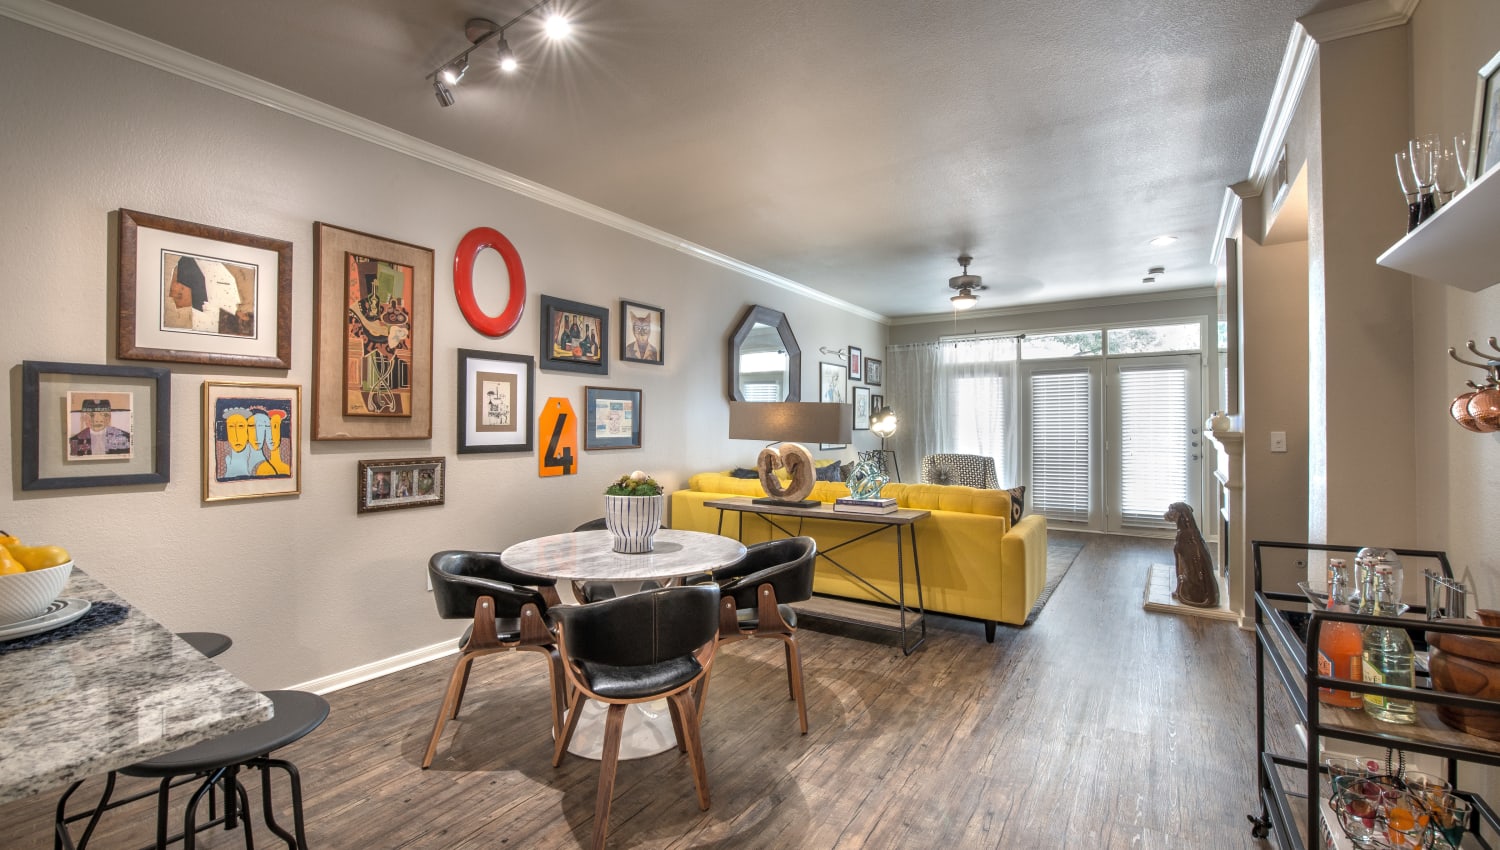 Dining area and living space in a spacious open floorplan home at 75 West in Dallas, Texas